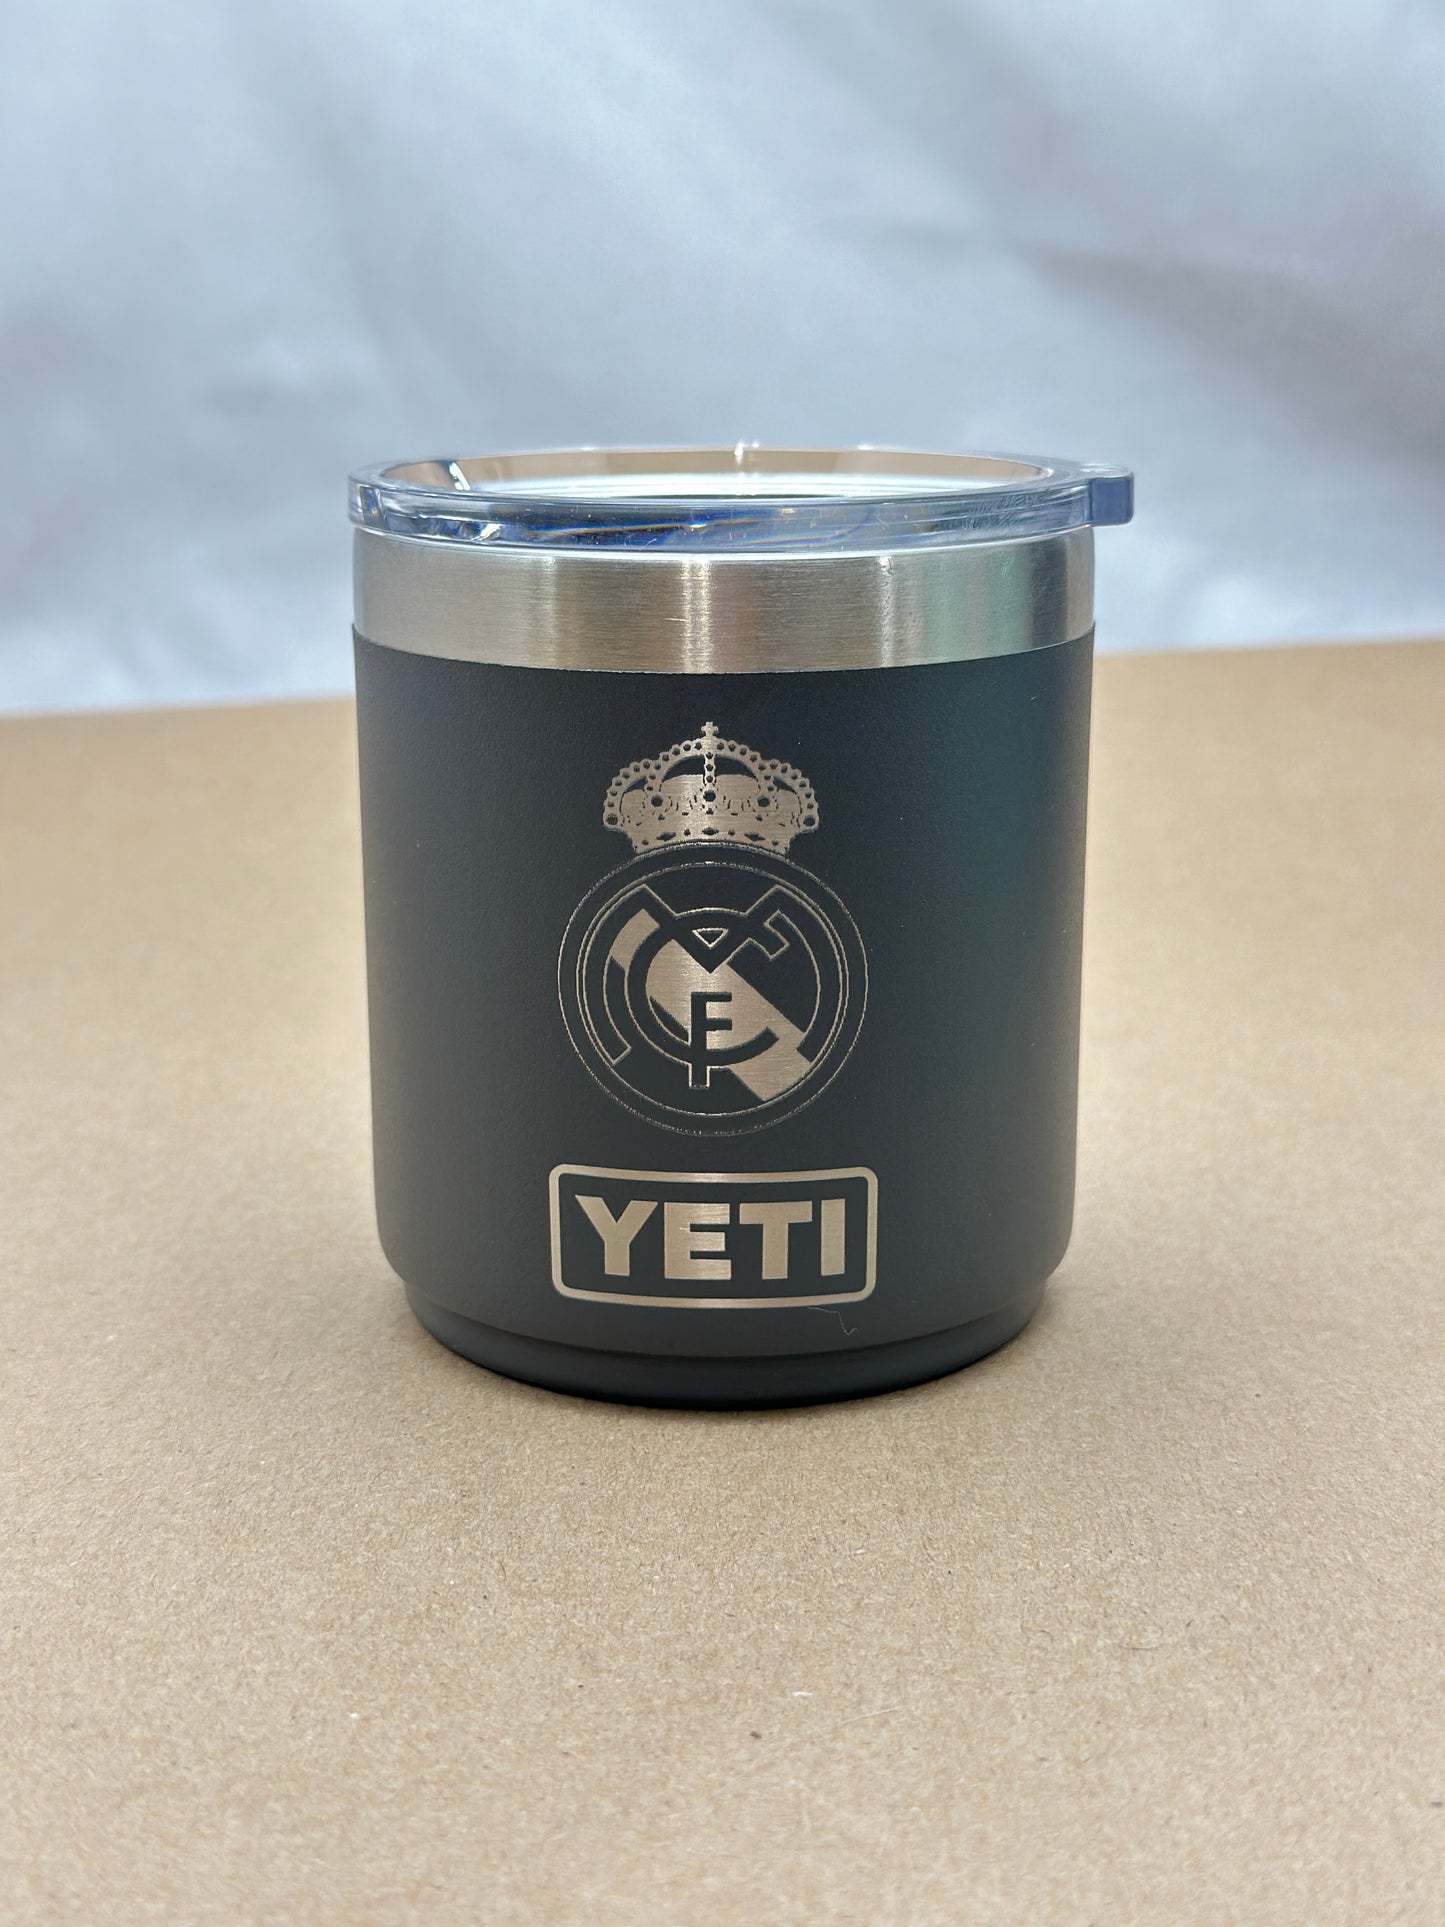 Yeti Rambler Stackable Lowball Tumbler with Magslider Lid - 10 oz - Navy